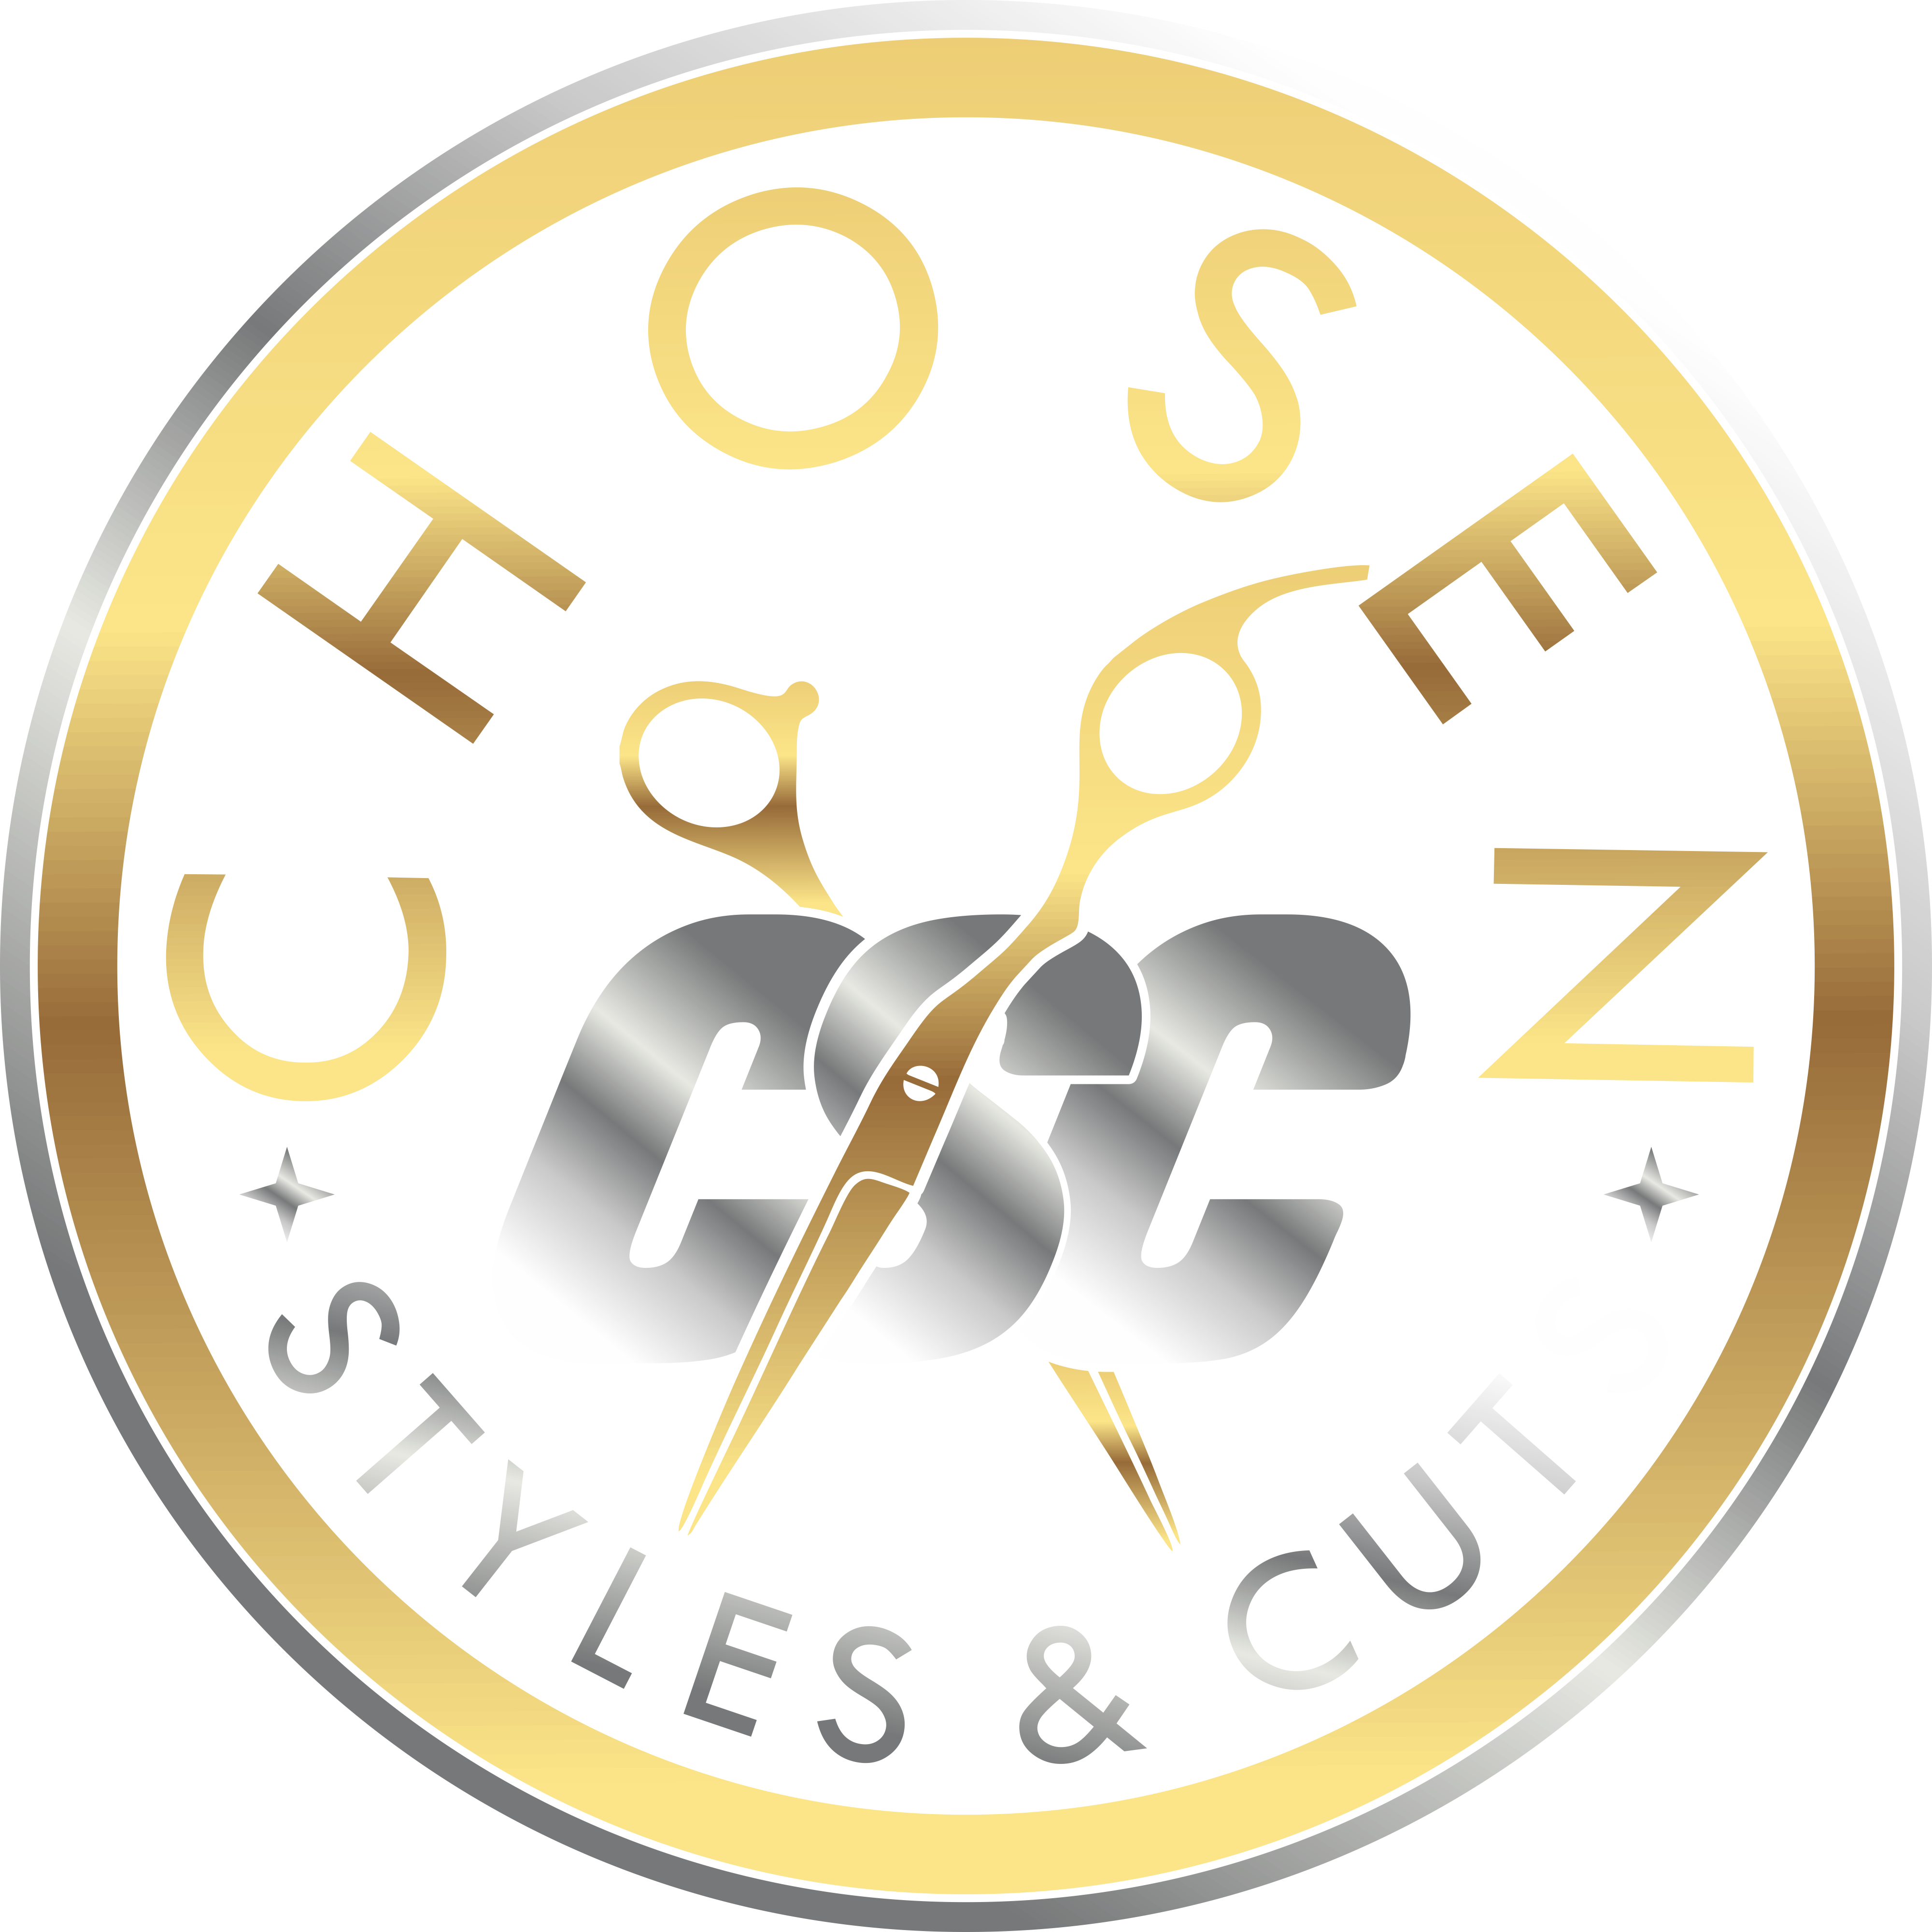 Chosen Styles and Cuts logo with scissors